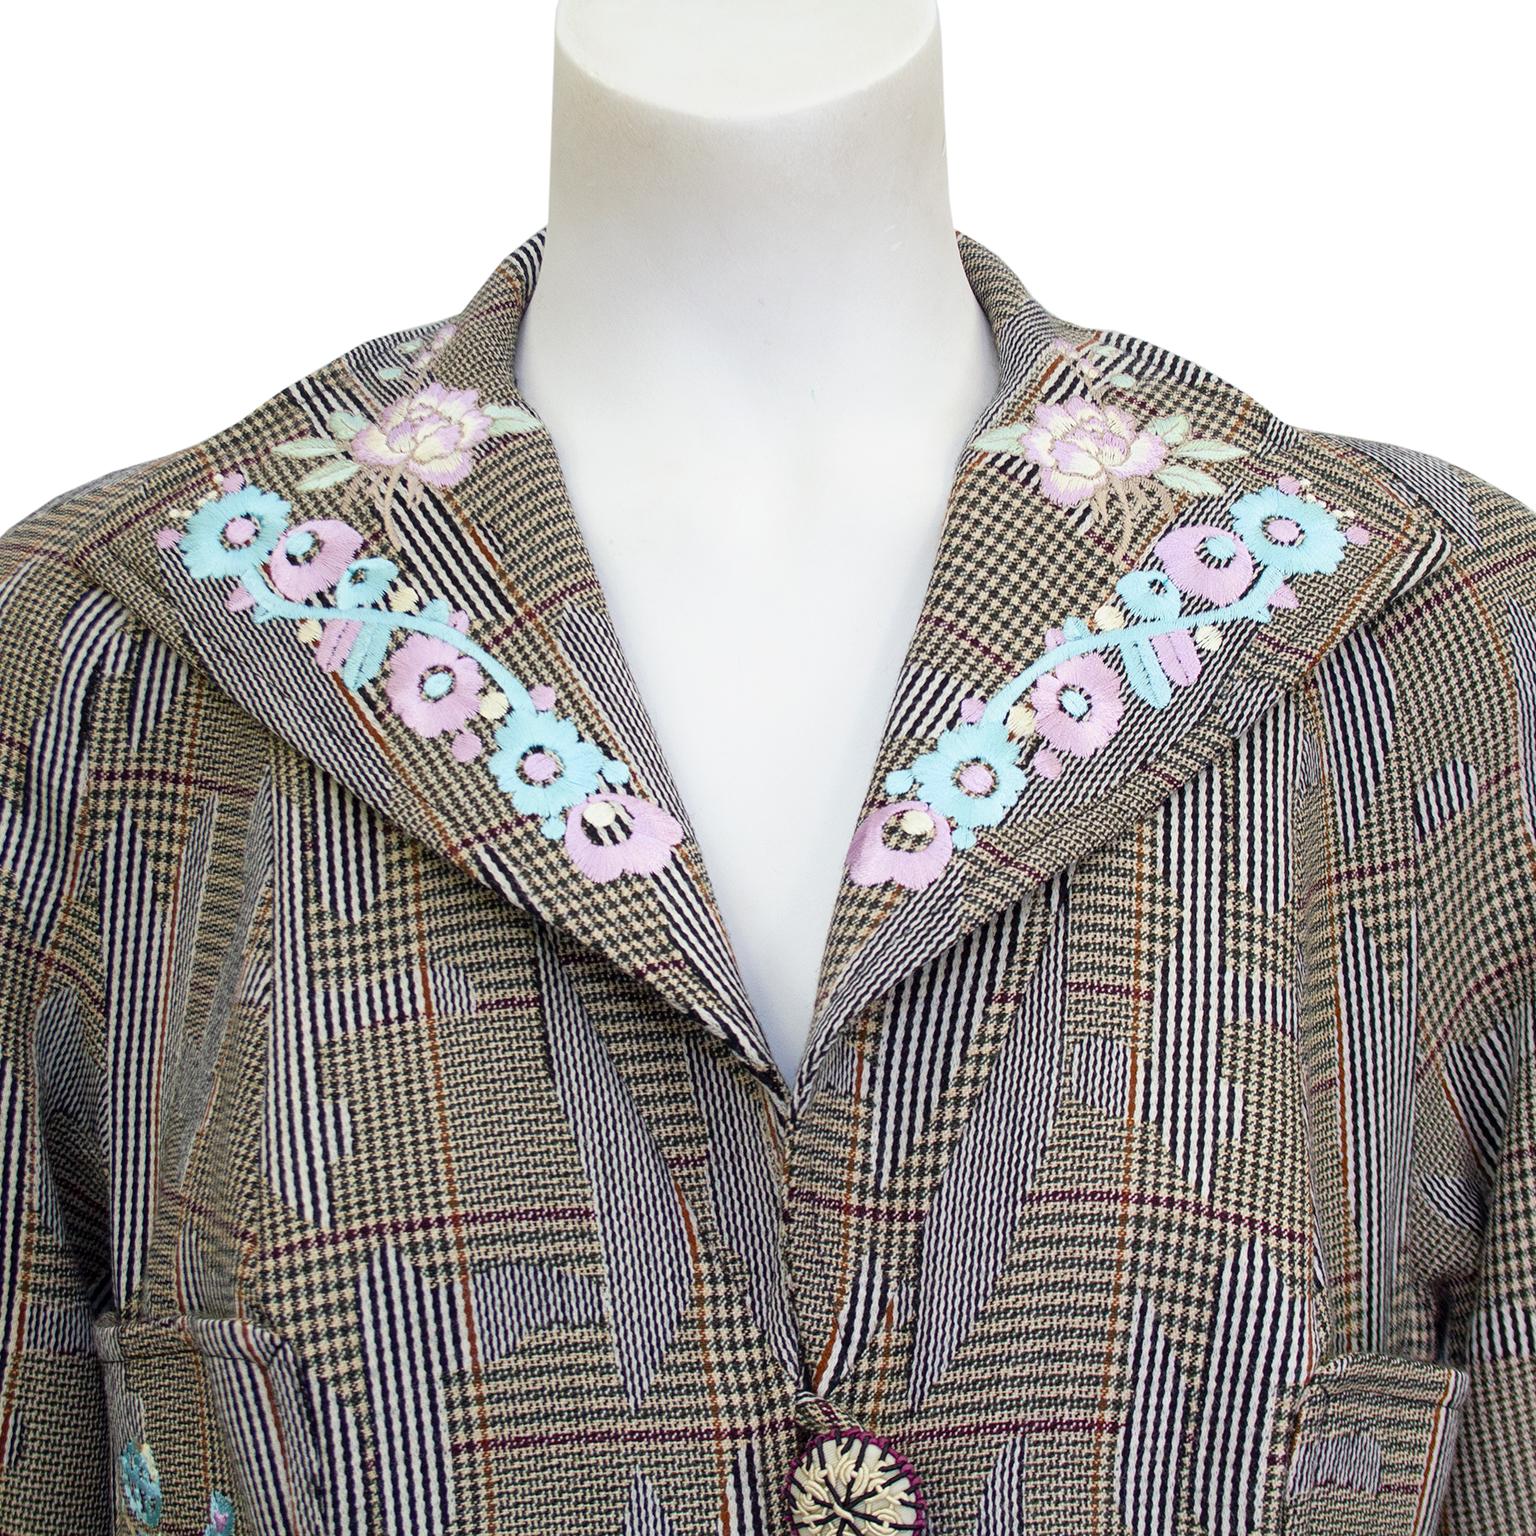 1990s Christian Lacroix Tweed Suit With Embroidery In Excellent Condition For Sale In Toronto, Ontario